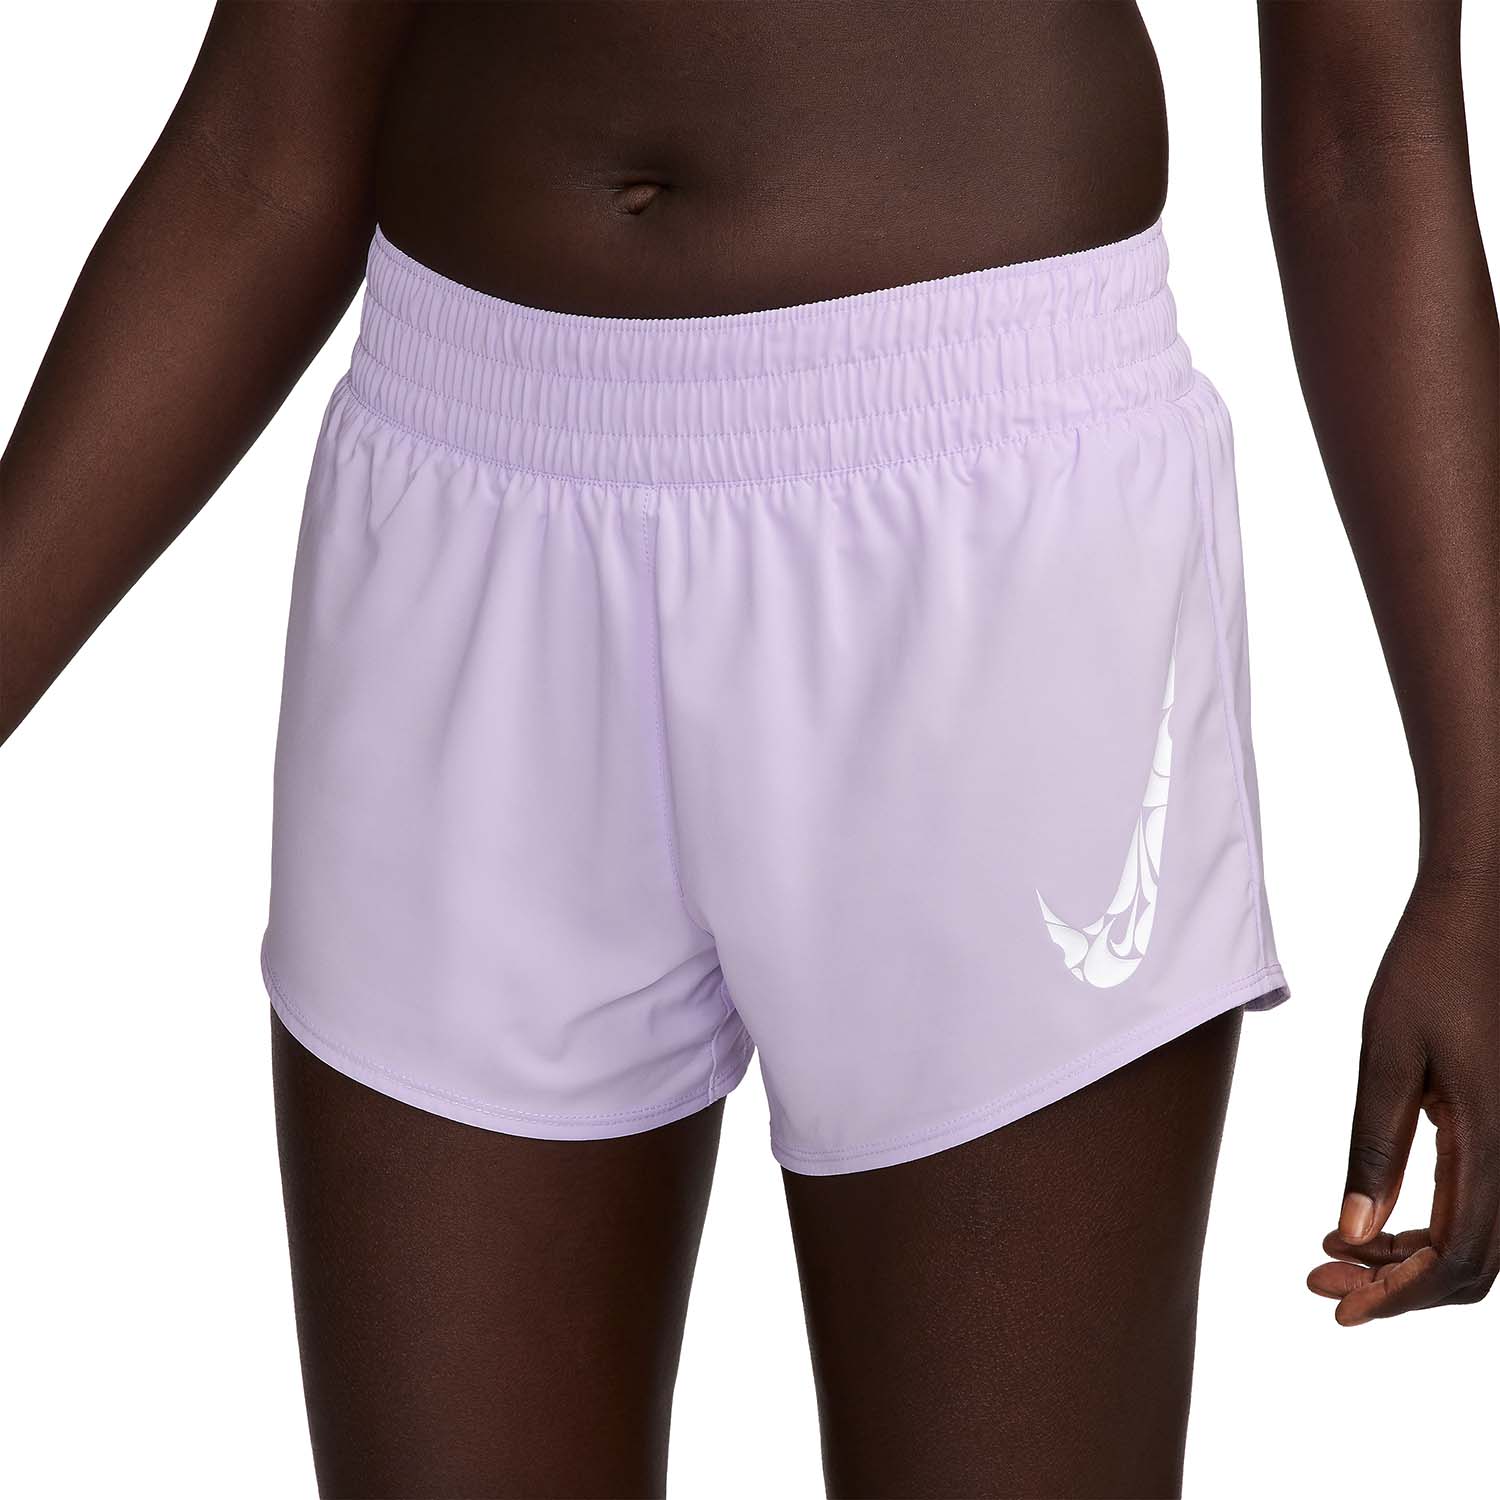 Nike One Swoosh 3.5in Shorts - Lilac Bloom/White